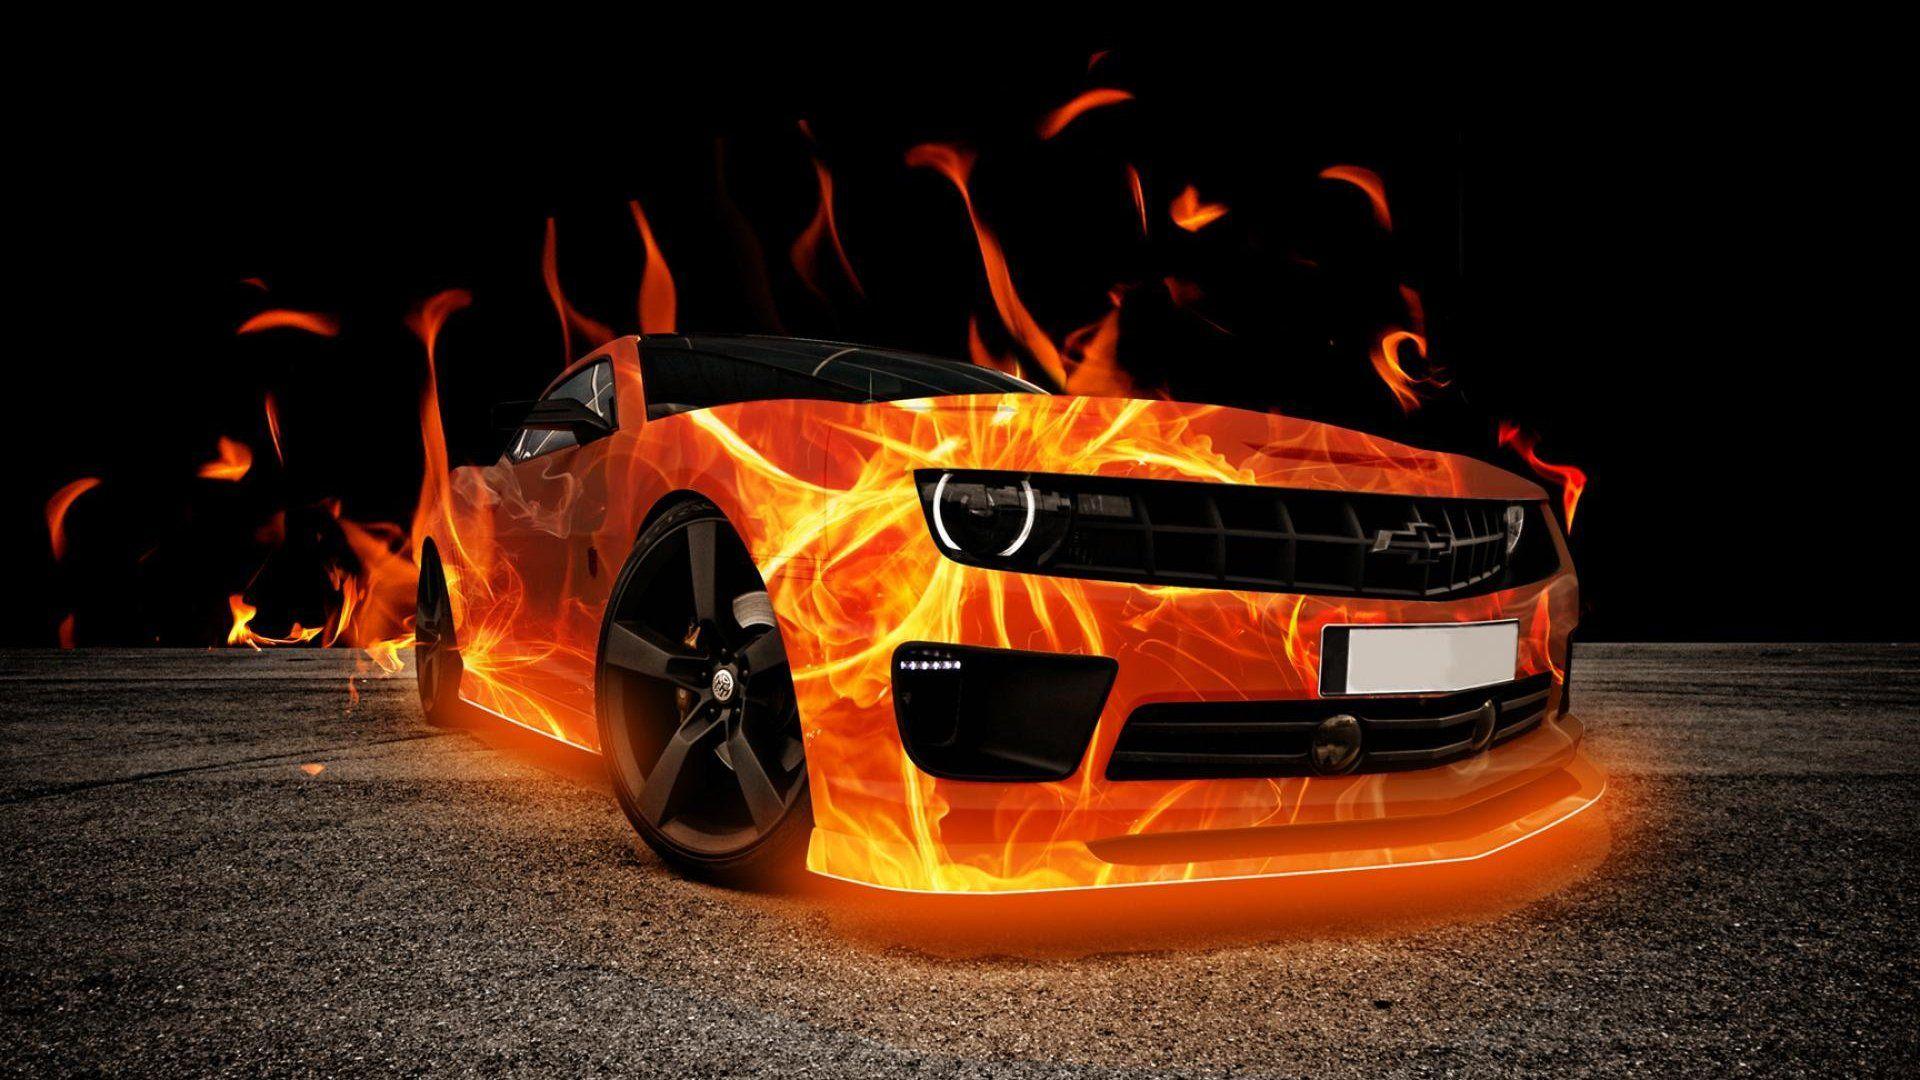 Free Amazing High Definition Car Wallpaper. Download Free HD